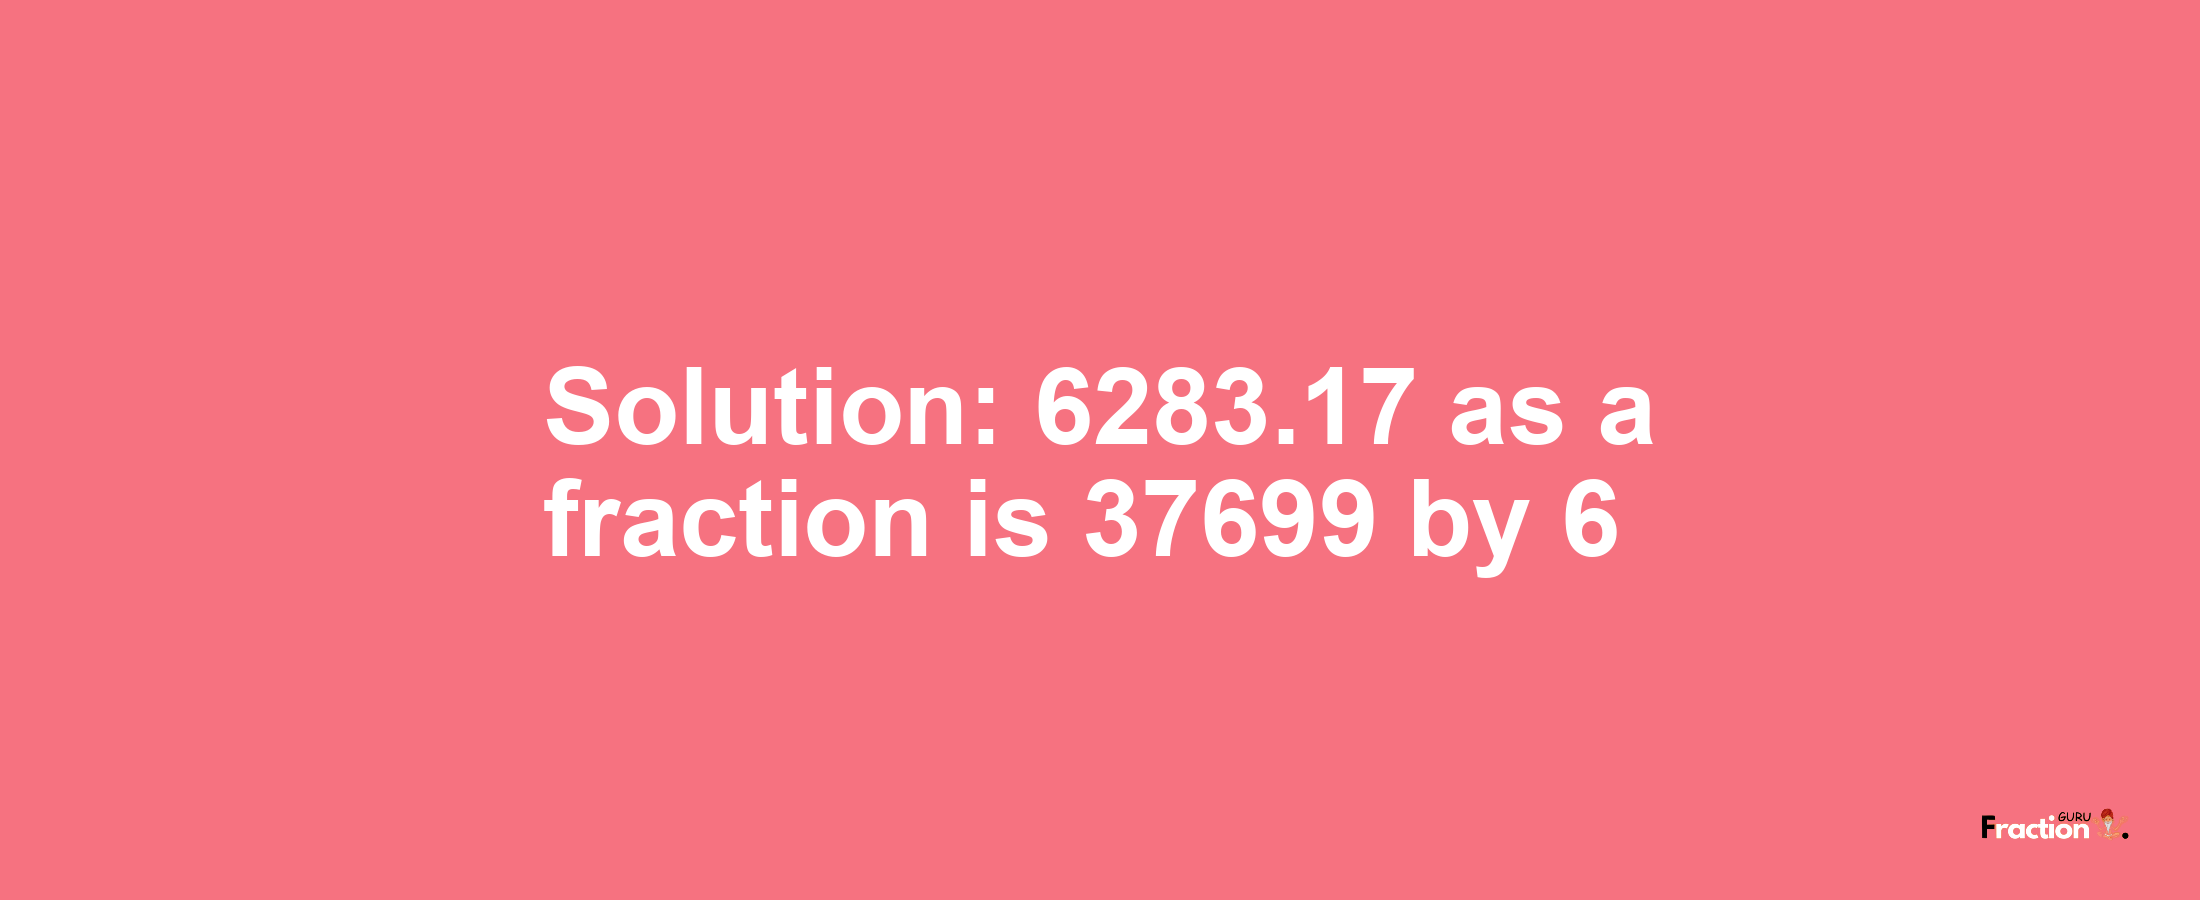 Solution:6283.17 as a fraction is 37699/6